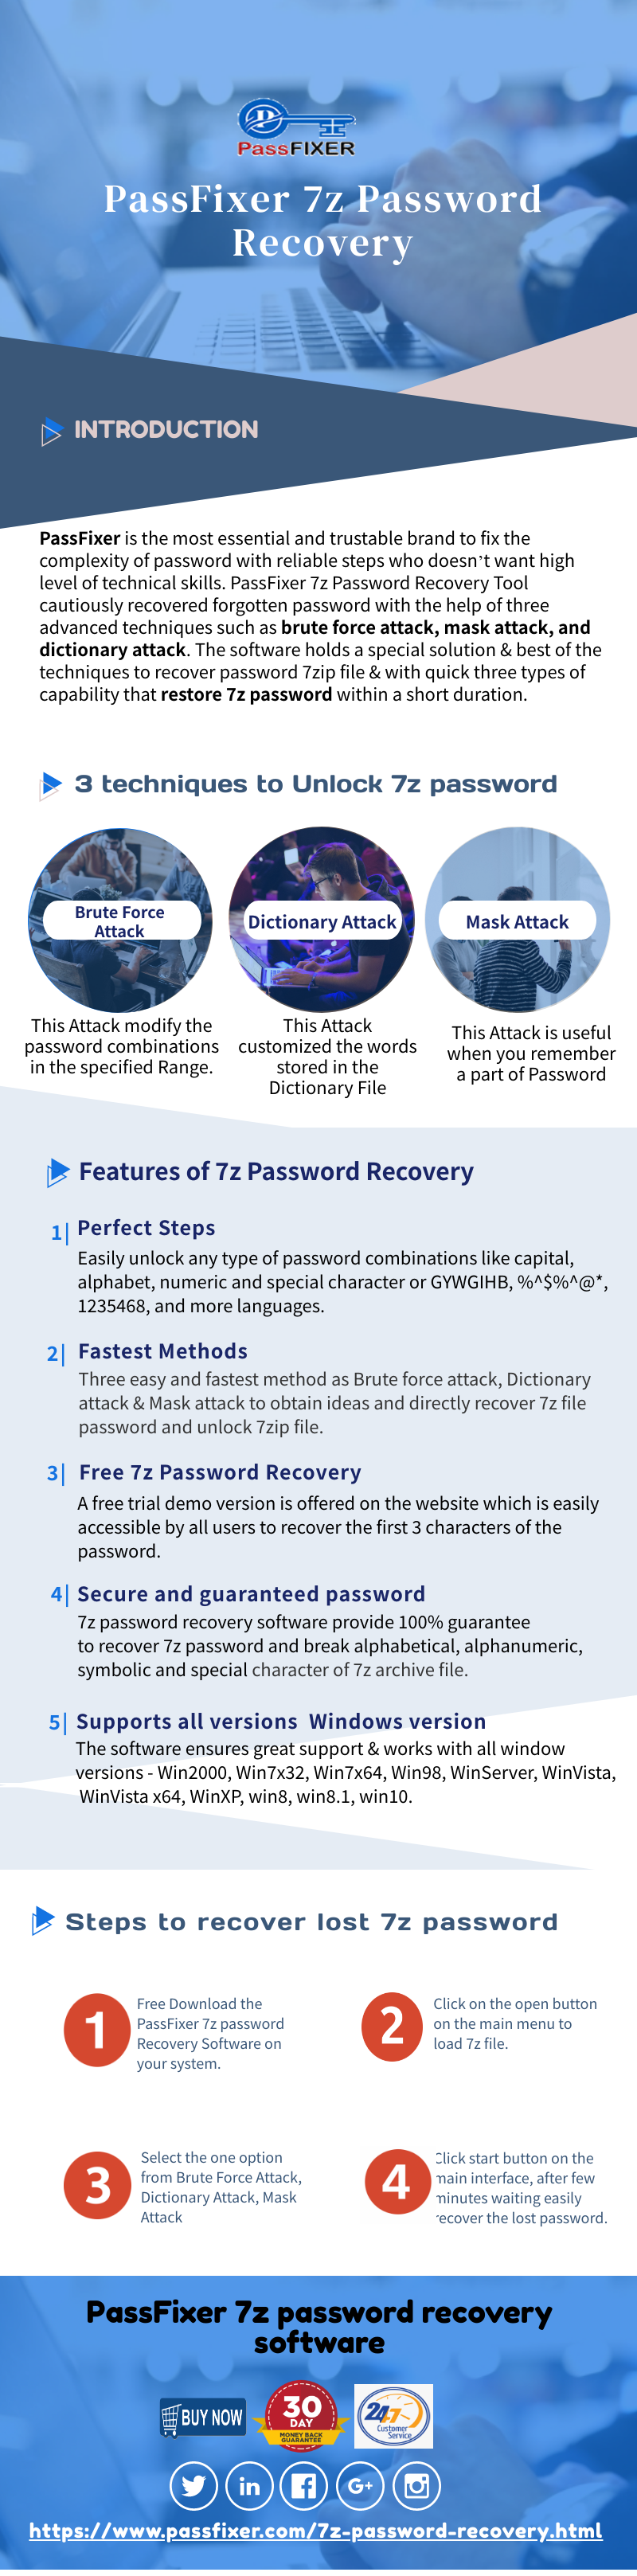 7z-password-recovery.png